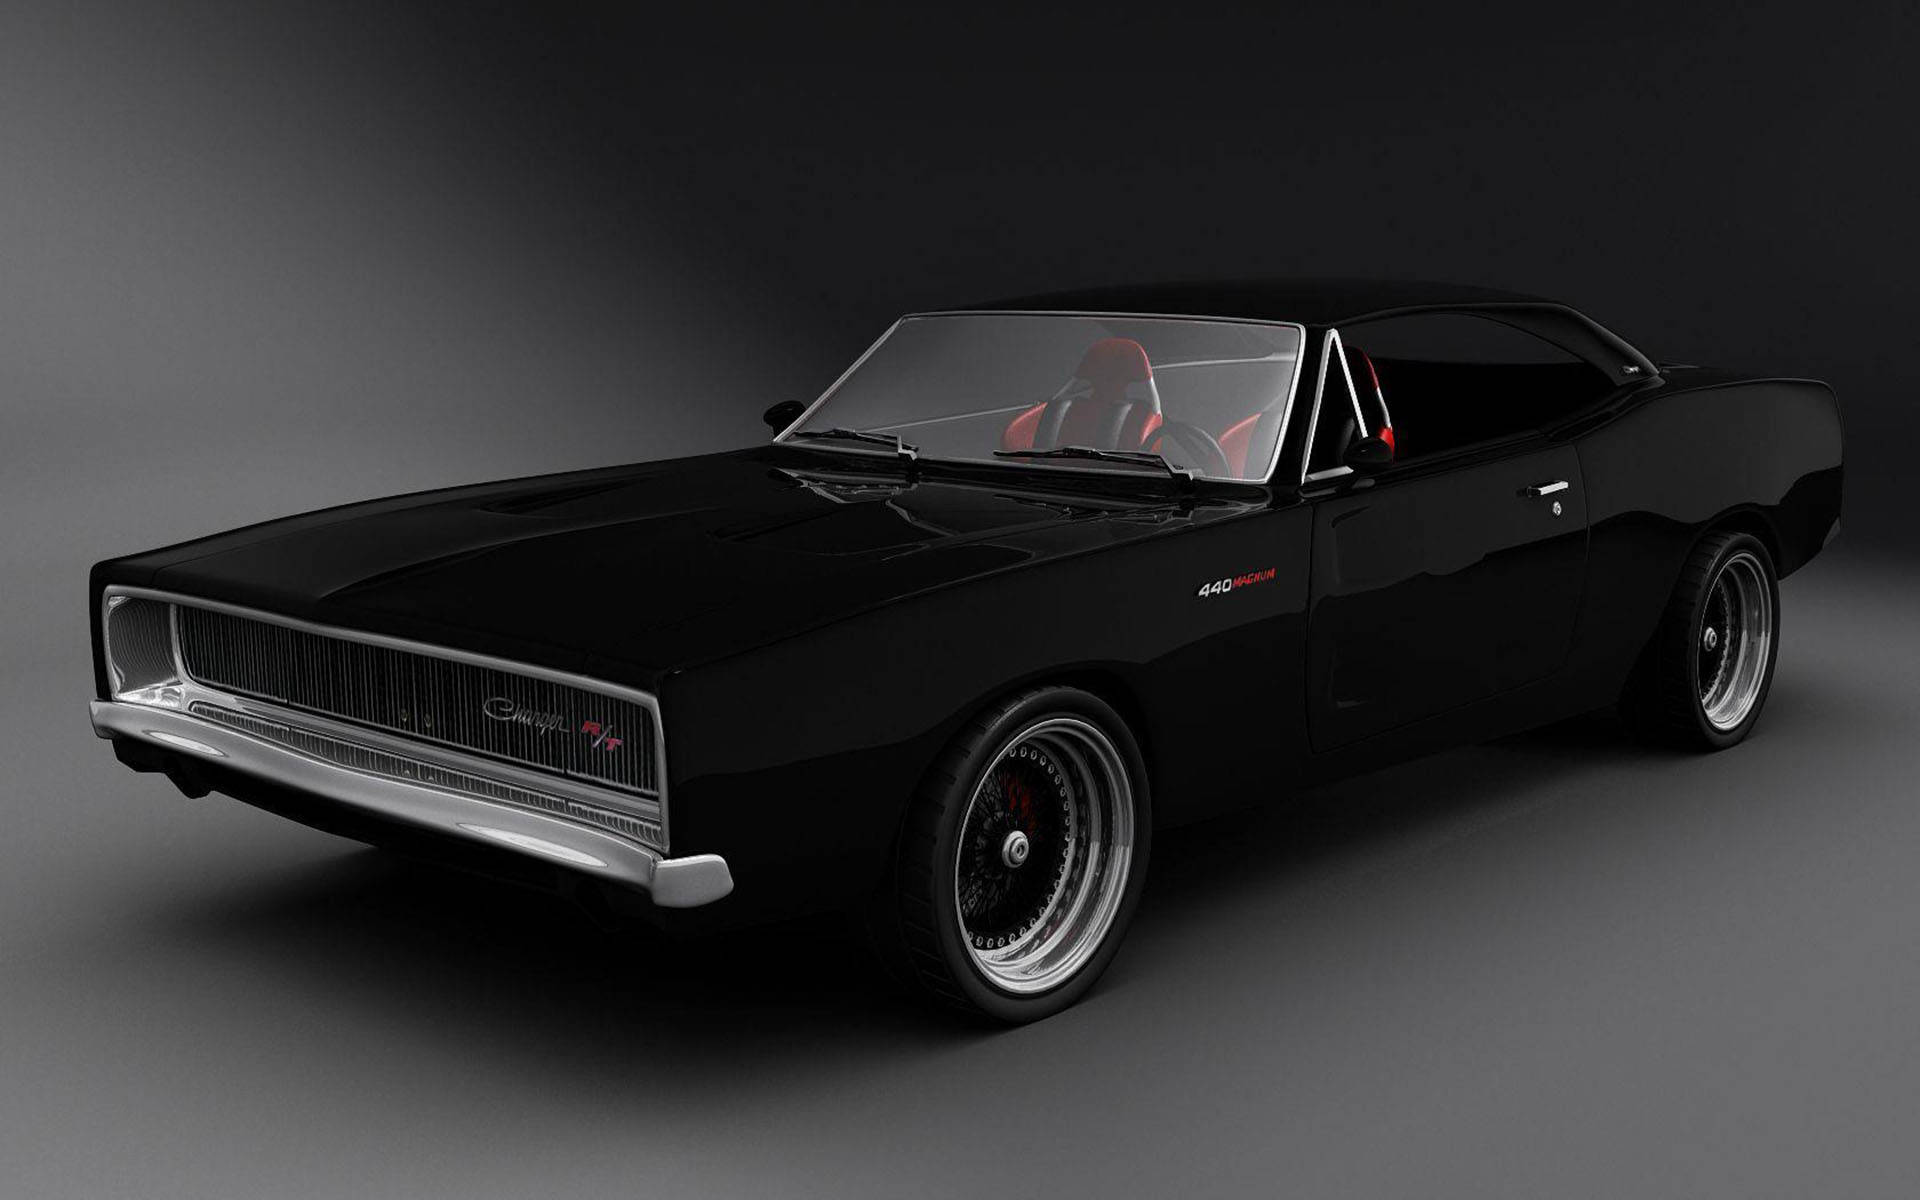 Immaculate Classic - 1969 Dodge Charger Background